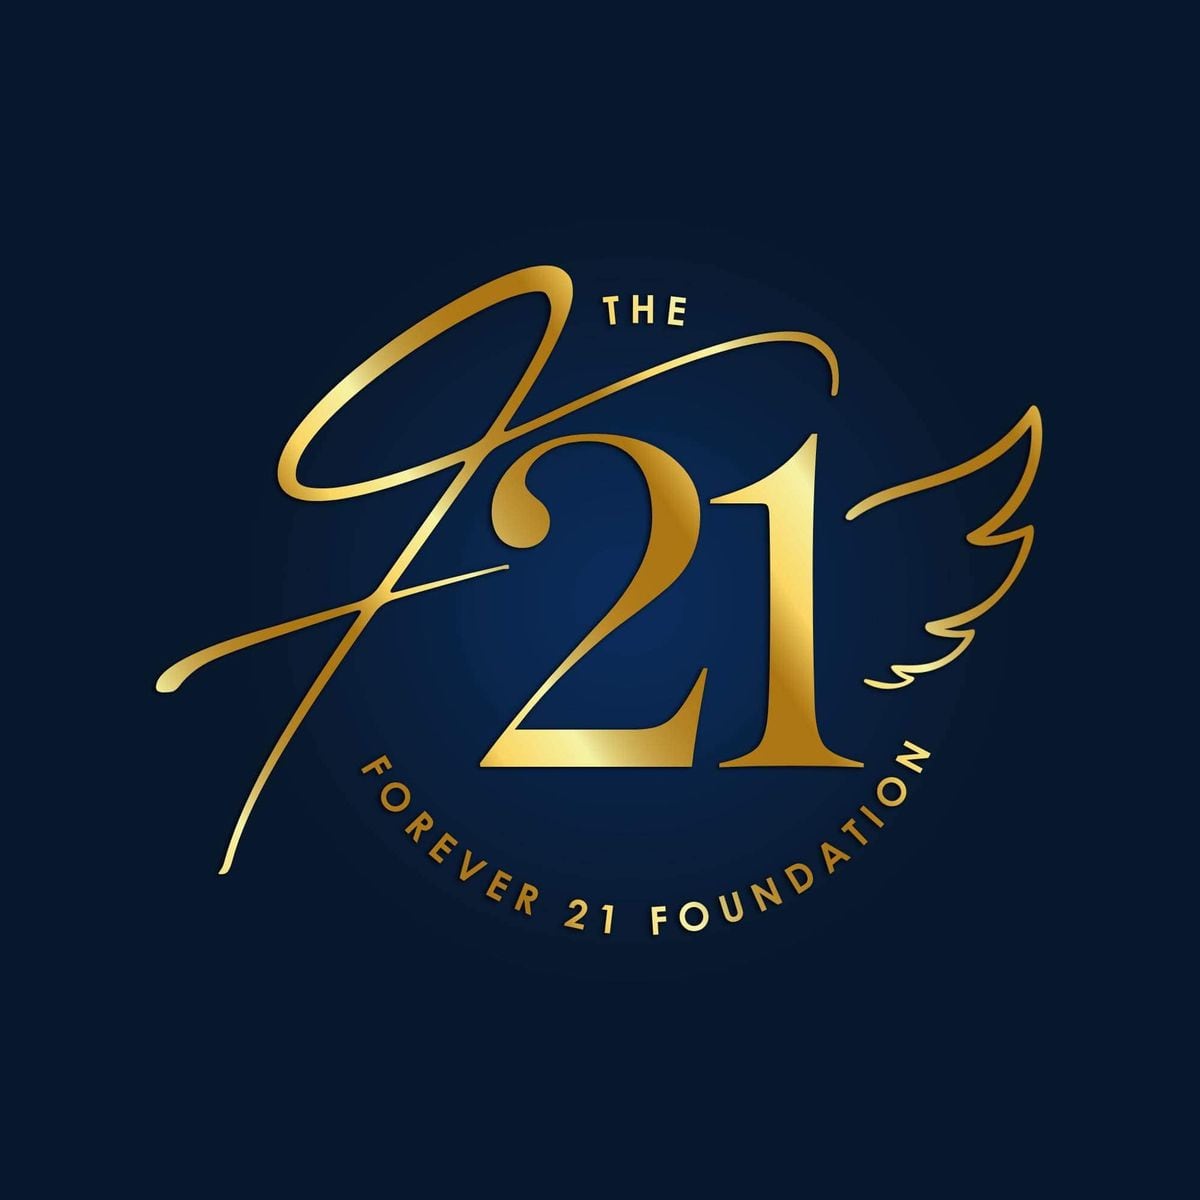 A logo created for the foundation in memory of Nathan Fleetwood.